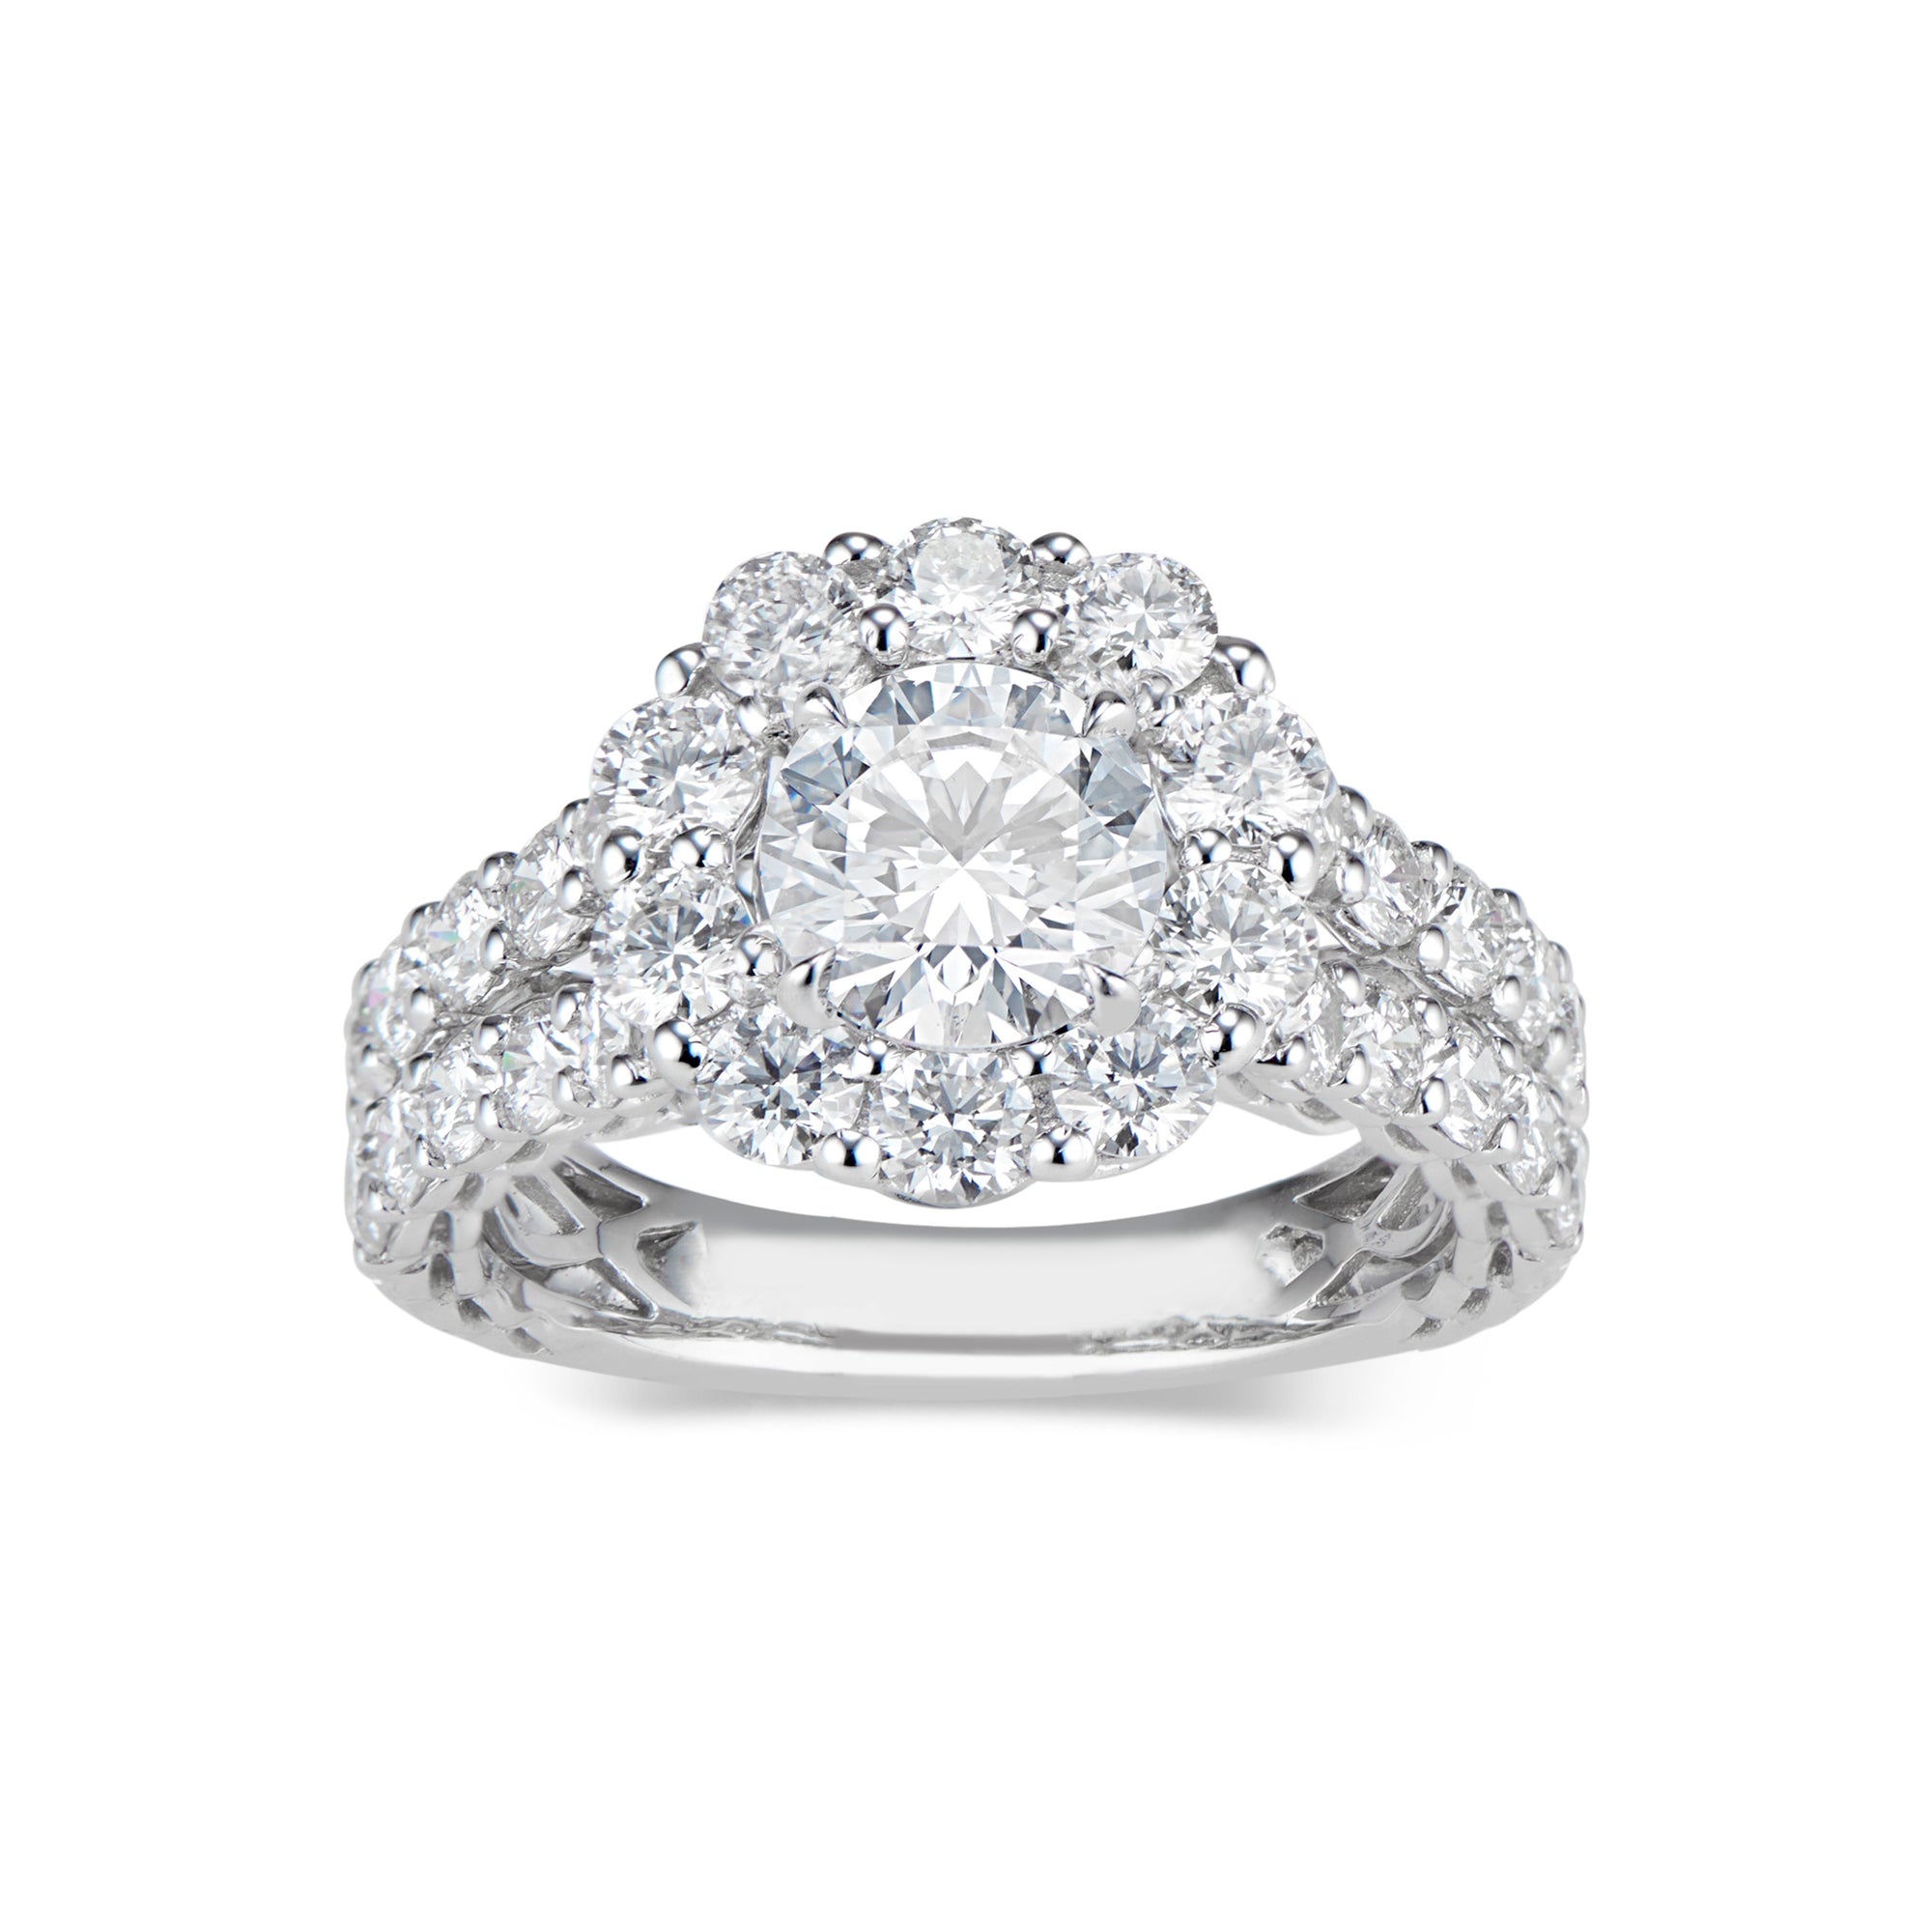 Round Halo Diamond Engagement Ring with Prong-Set Diamond Shank  -18K WEIGHTING 5.92 GR  - 30 round diamonds totaling 2.04 carats